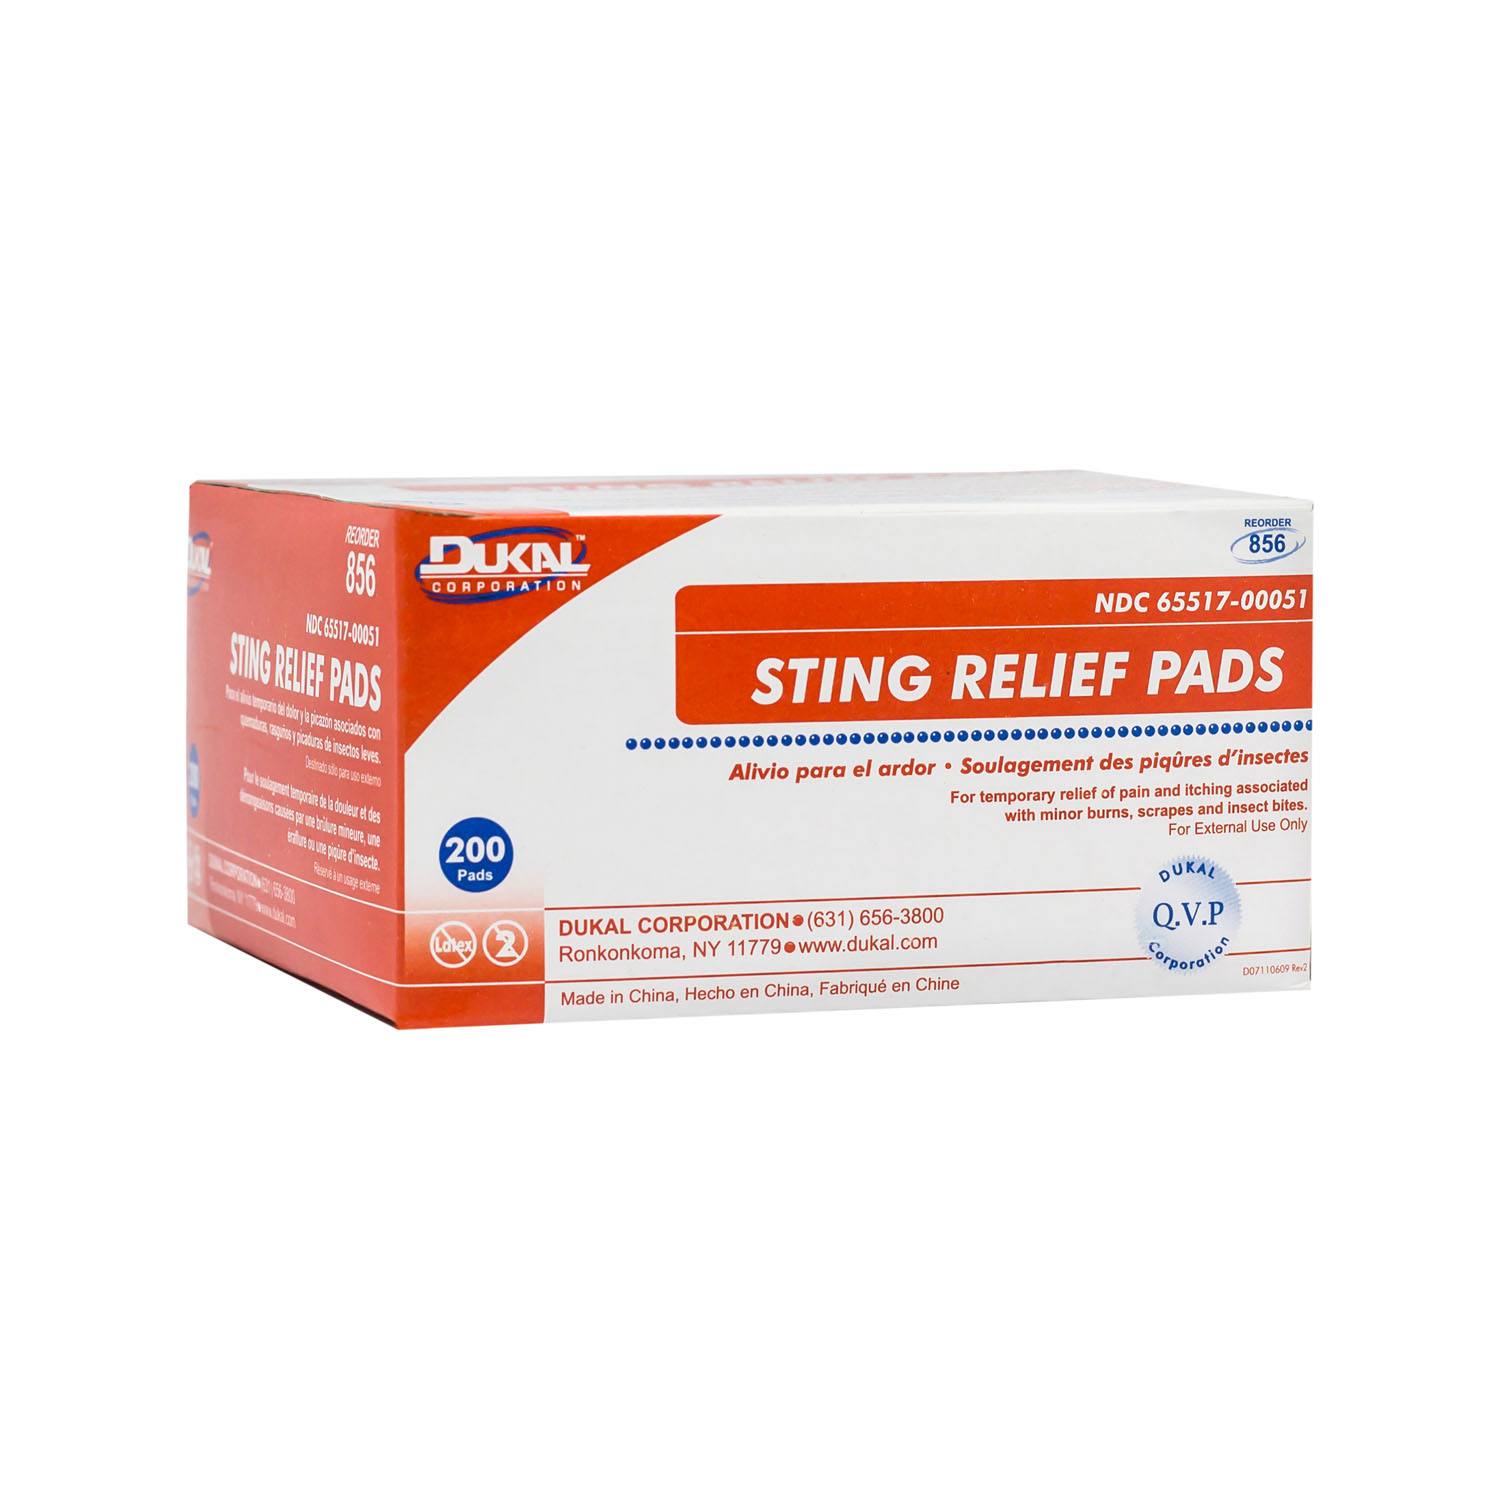 DUKAL STING RELIEF PAD : 856 BX